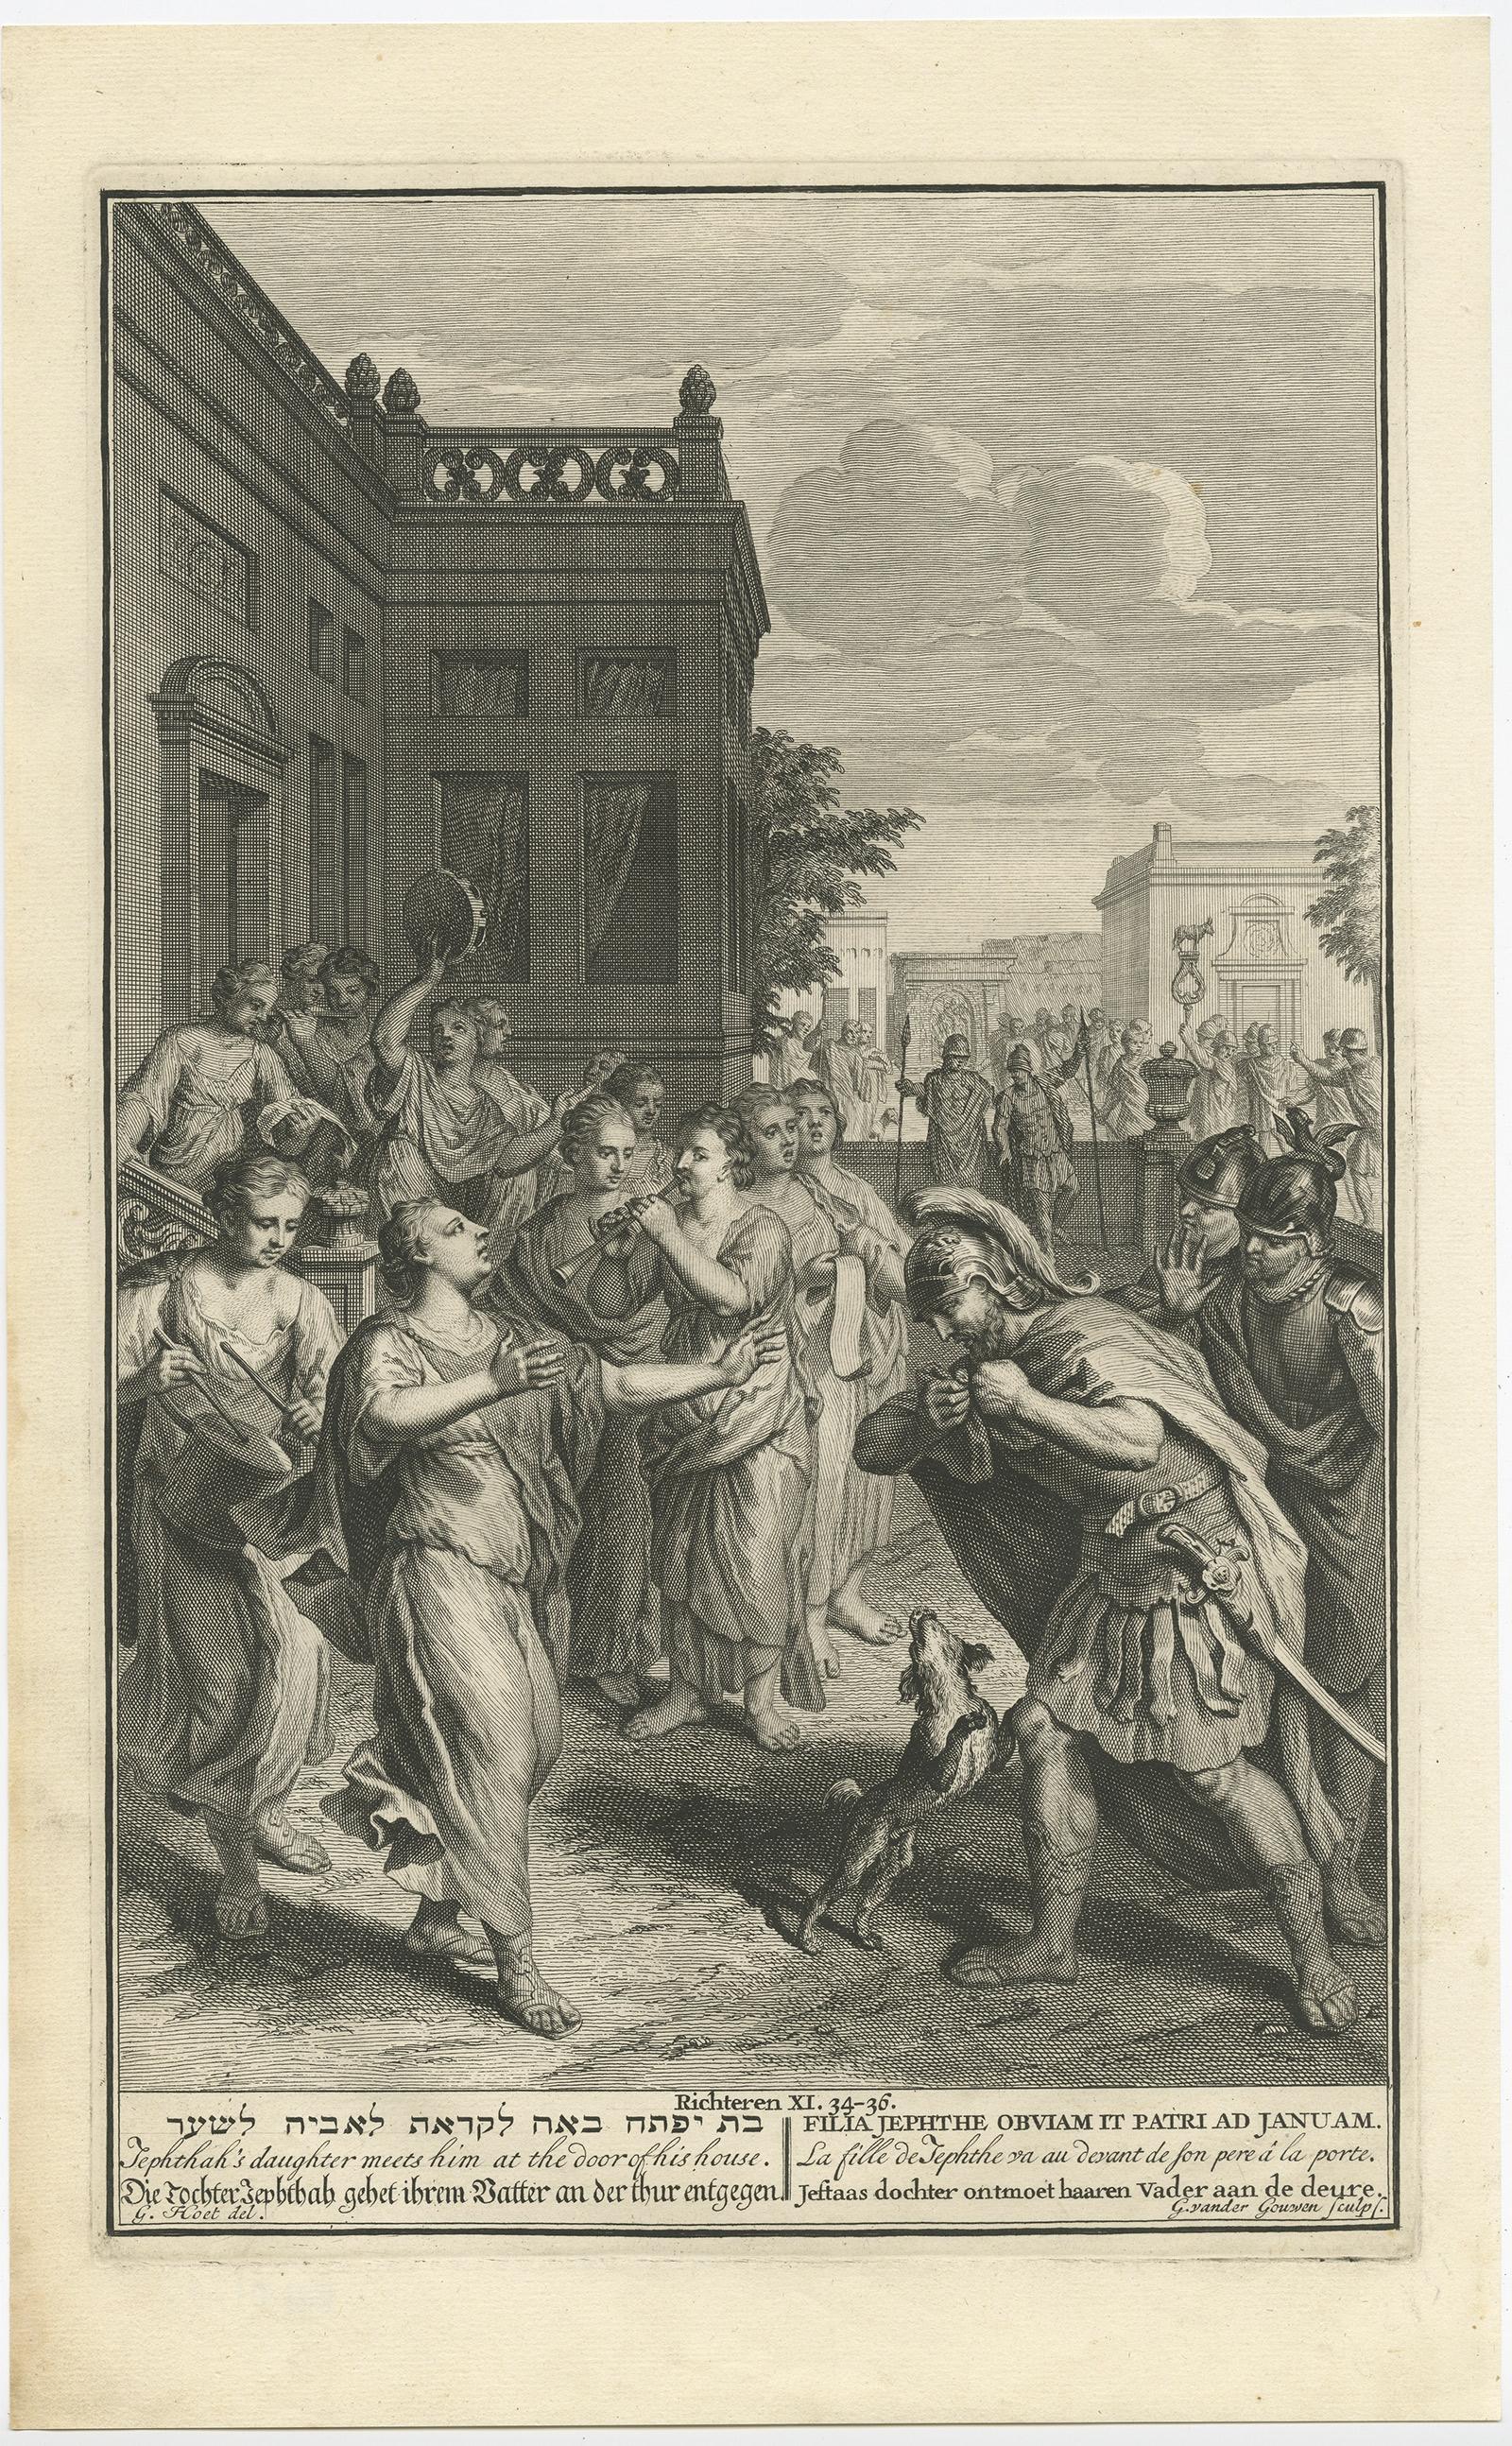 Antique religion print titled 'Jephthah's daughter meets him at the door of his house'. 

The story of Jephthah’s Daughter (Judges 11) tells us that Jephthah the Gileadite made a vow to the Lord before going into battle with the Ammonites. This